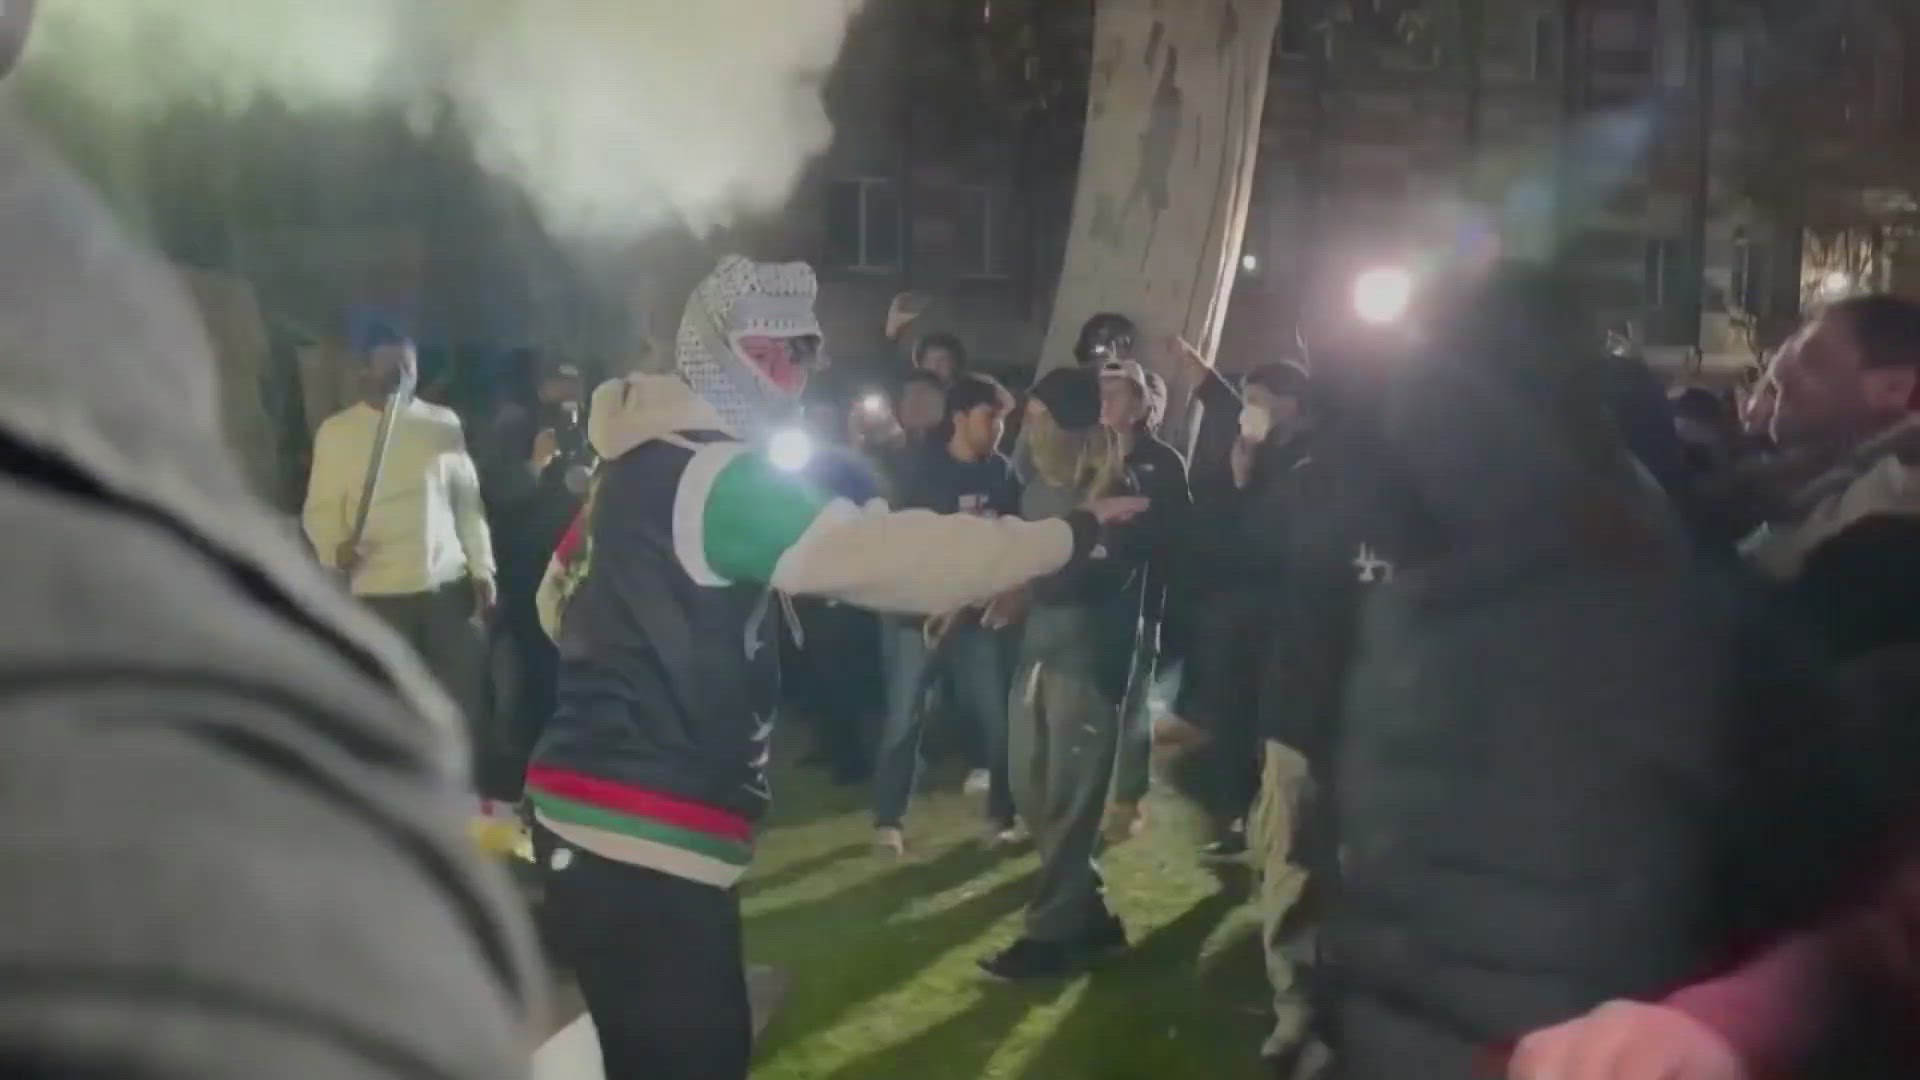 Classes were canceled on Wednesday at UCLA following clashes between protestors that exploded.